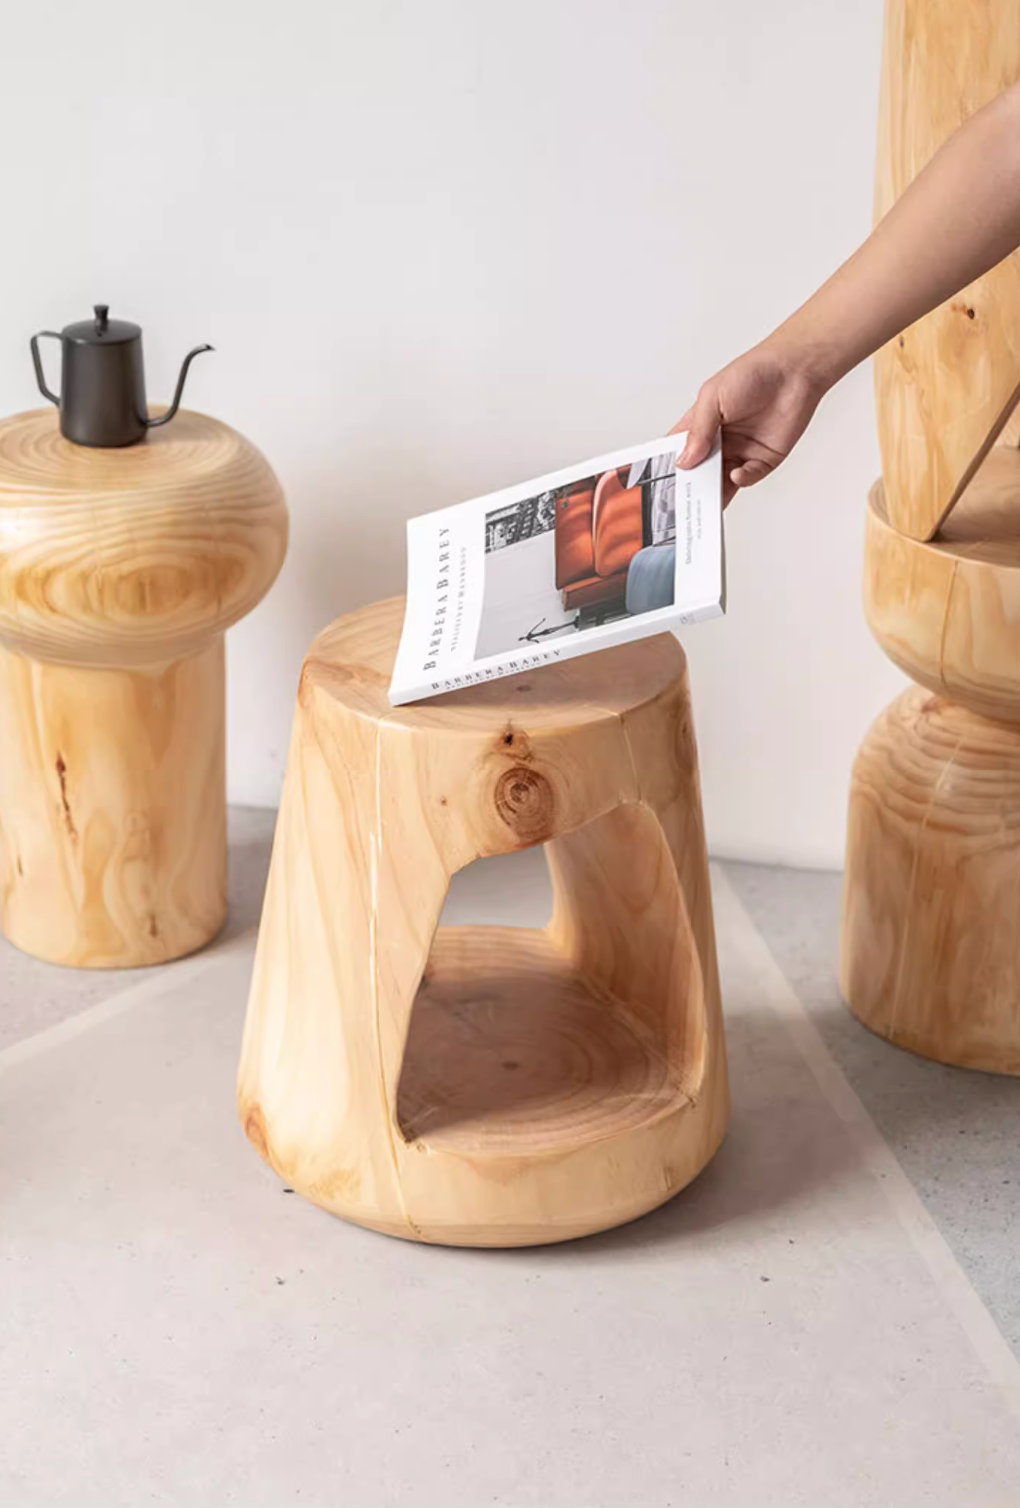 Solid Wood Stools, Customizable Size